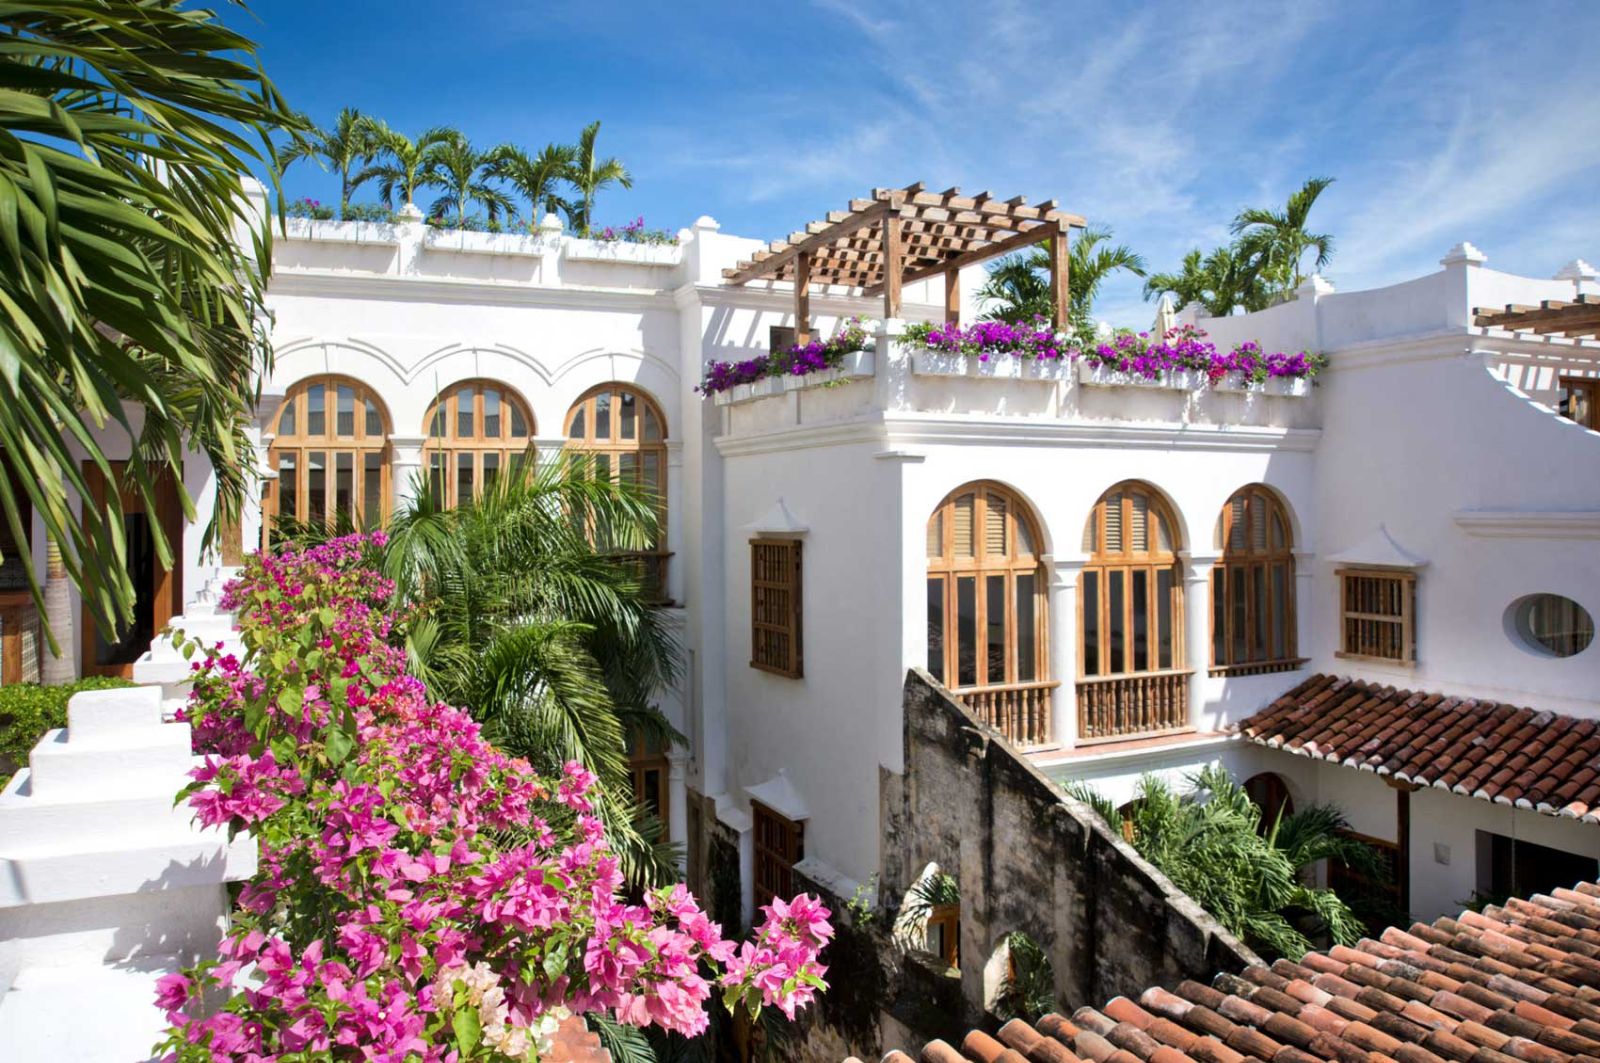 Guest suite exterior at Casa San Agustin in Cartagena, Colombia